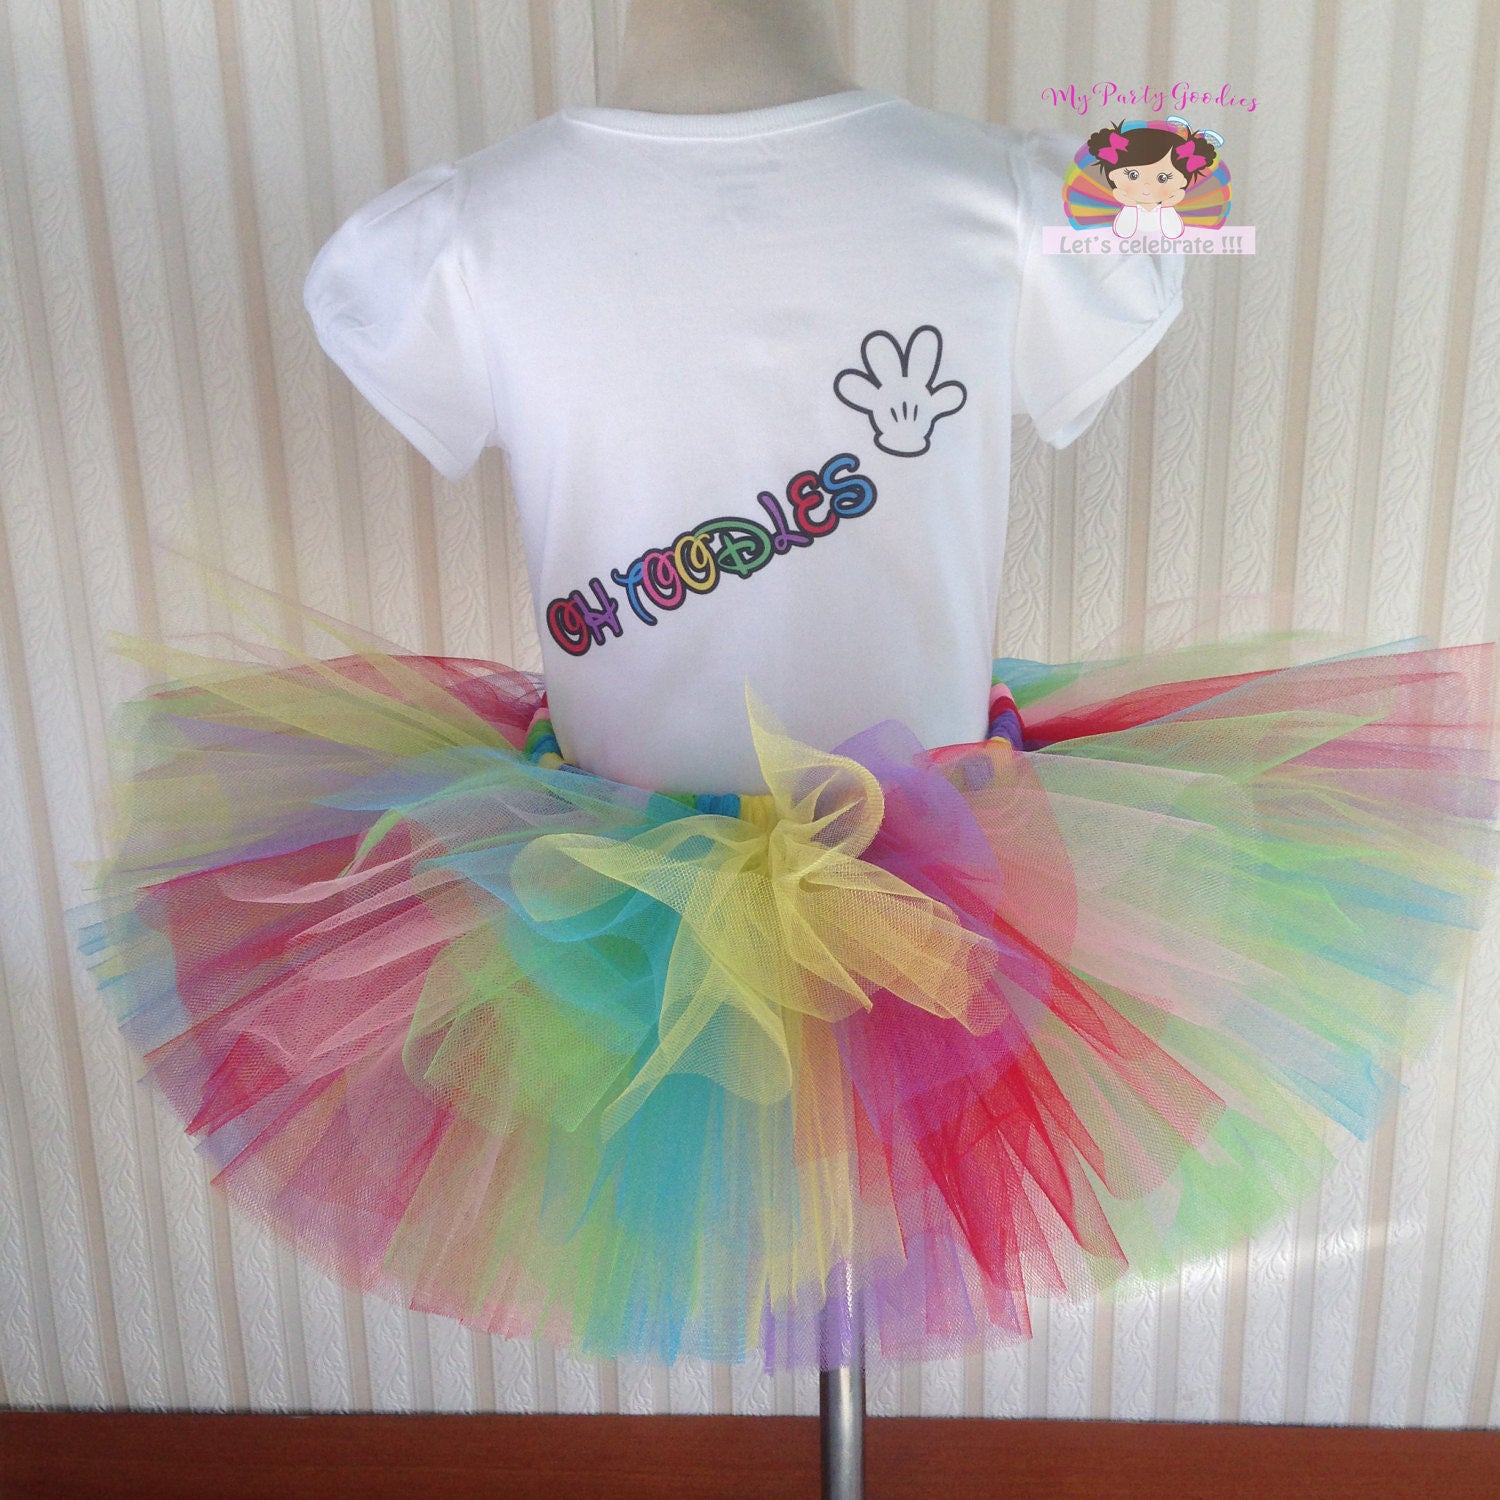 Birthday Girl Tutu outfit M Mouse Club